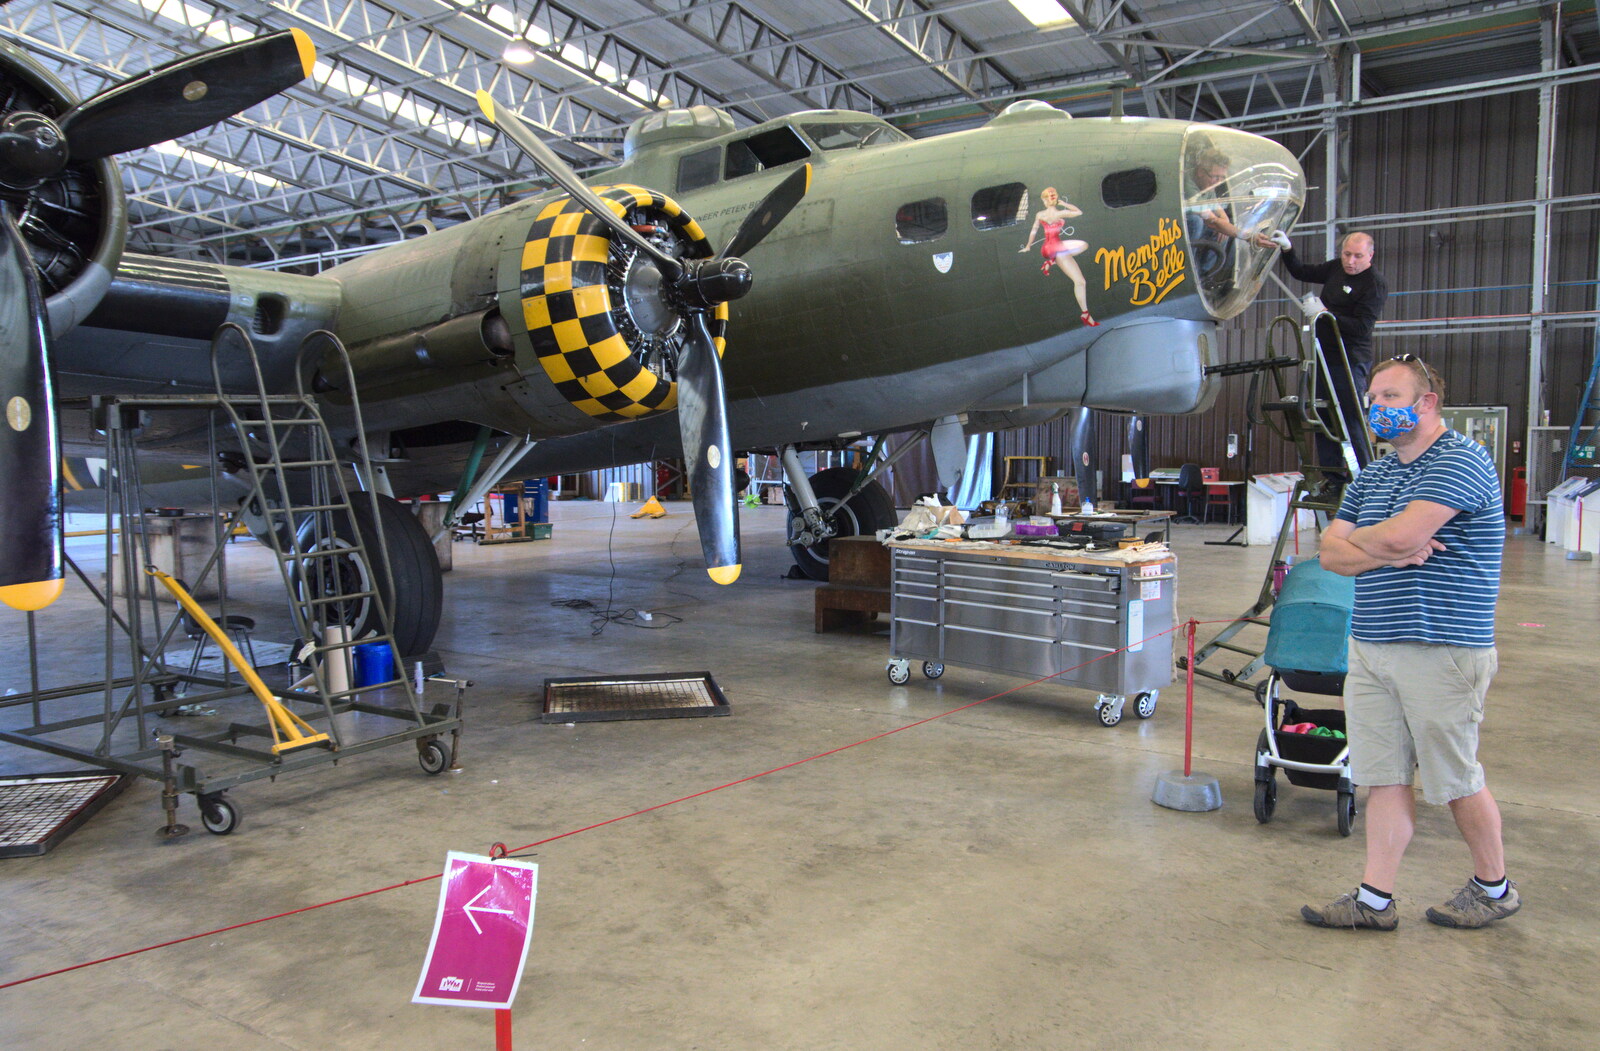 B-17 Memphis Belle is in for repairs from The Duxford Dash, IWM Duxford, Cambridge - 13th September 2020